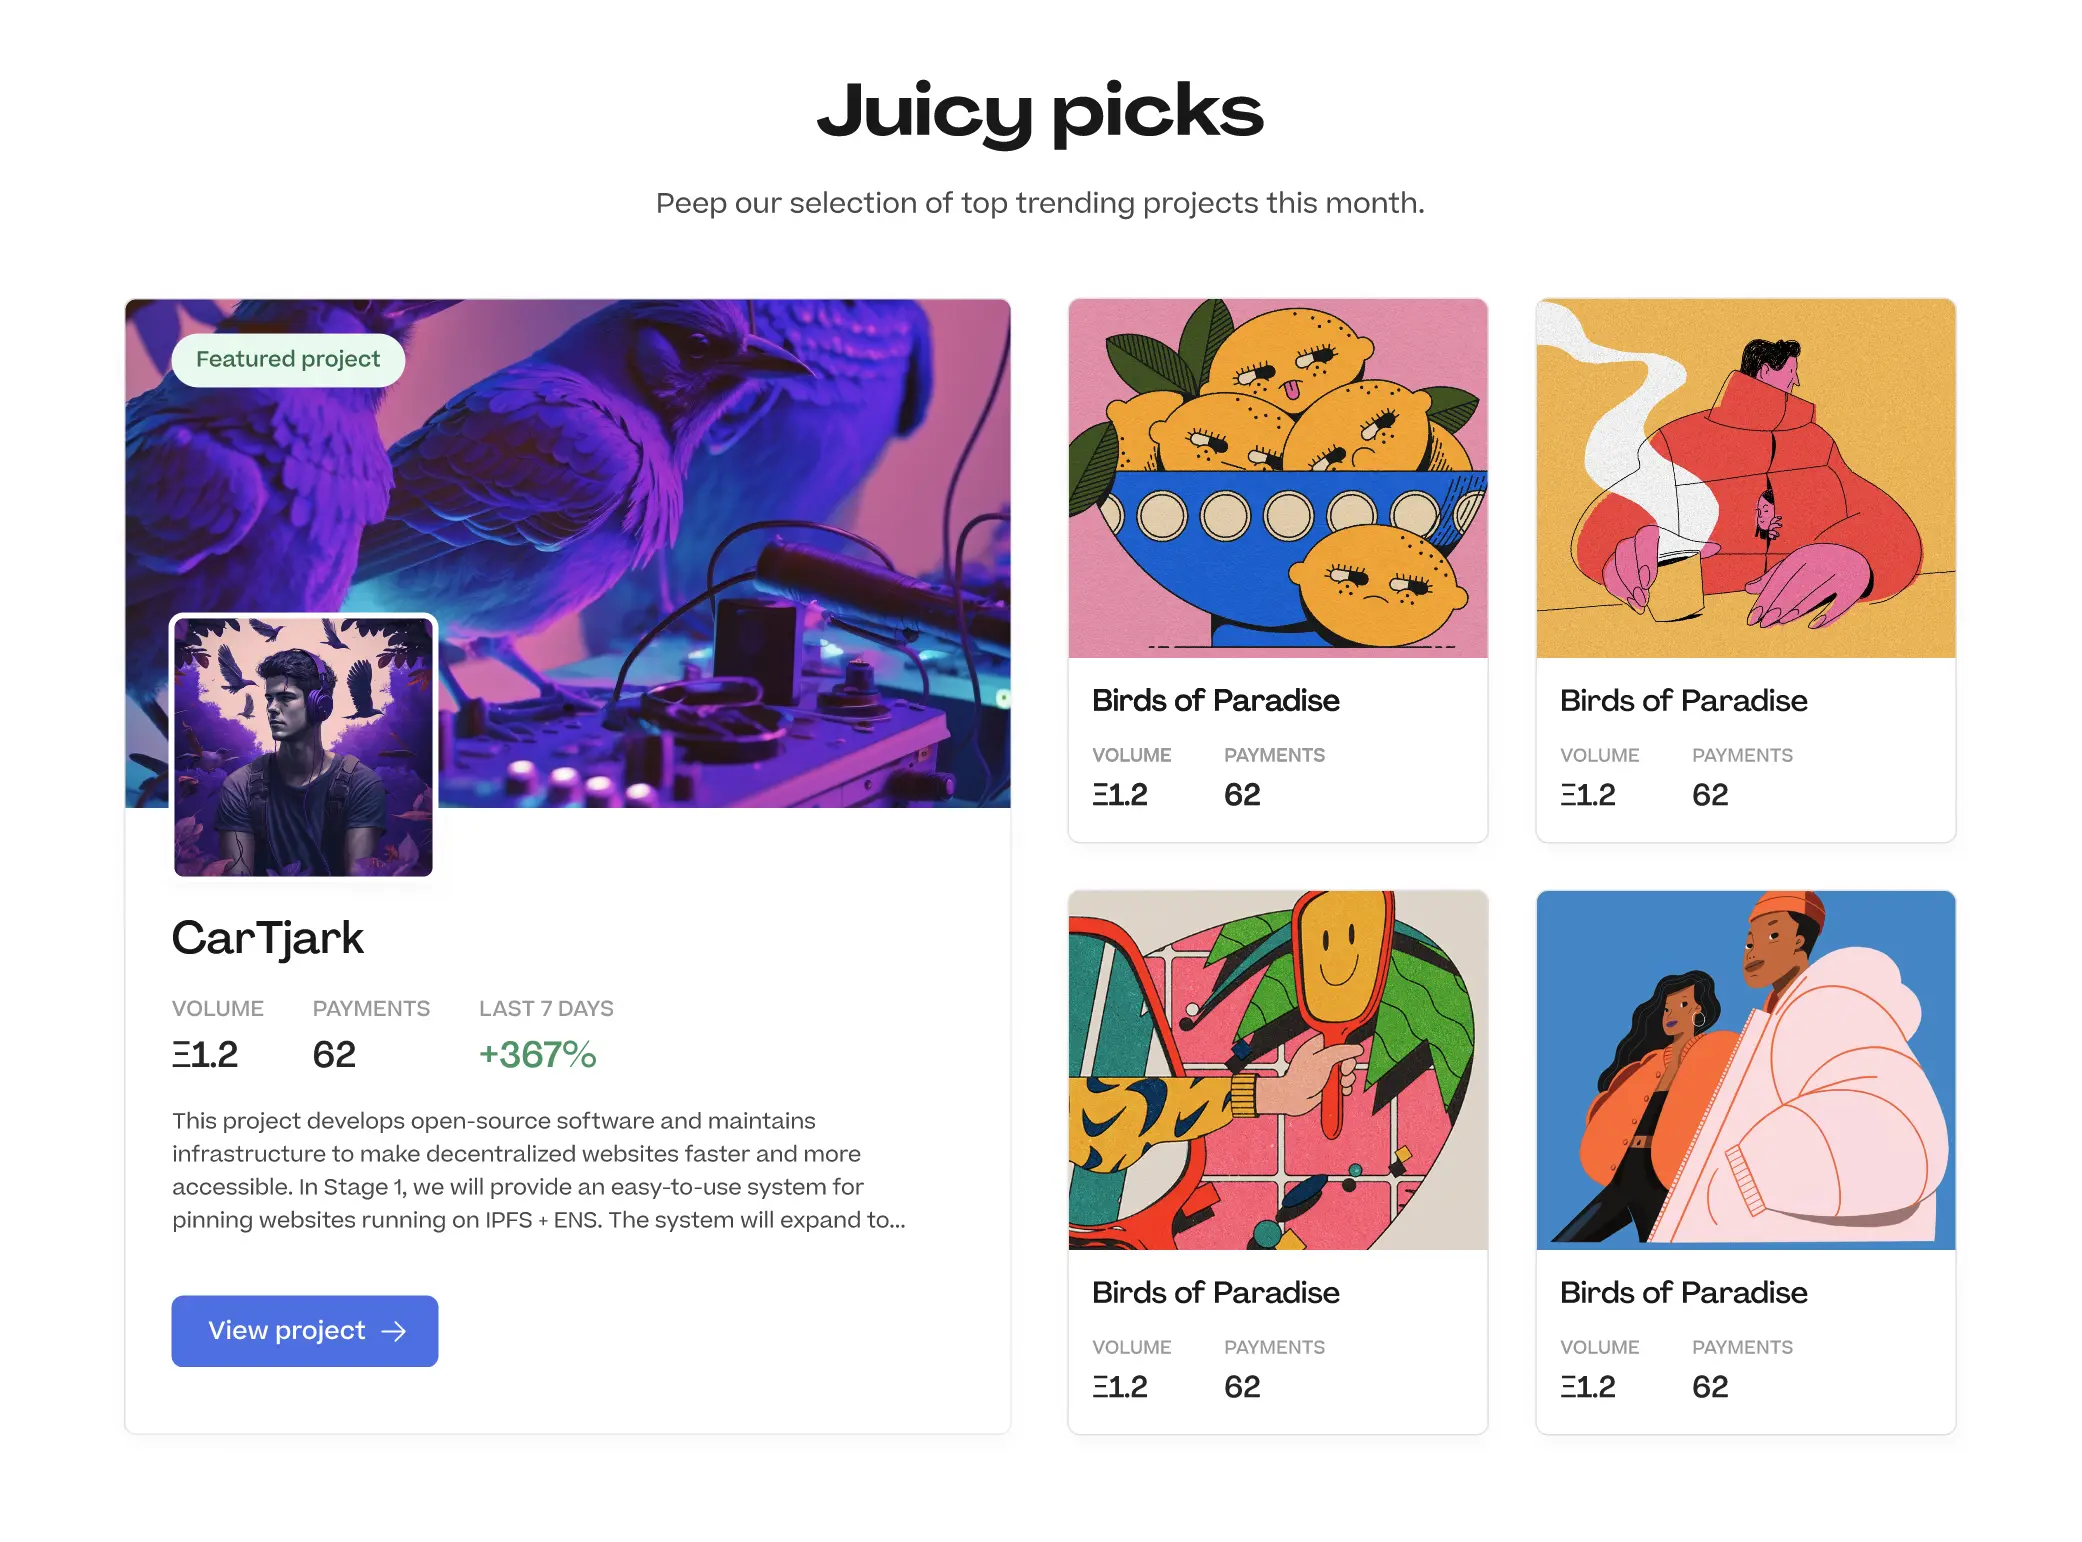 juicy picks section of new design